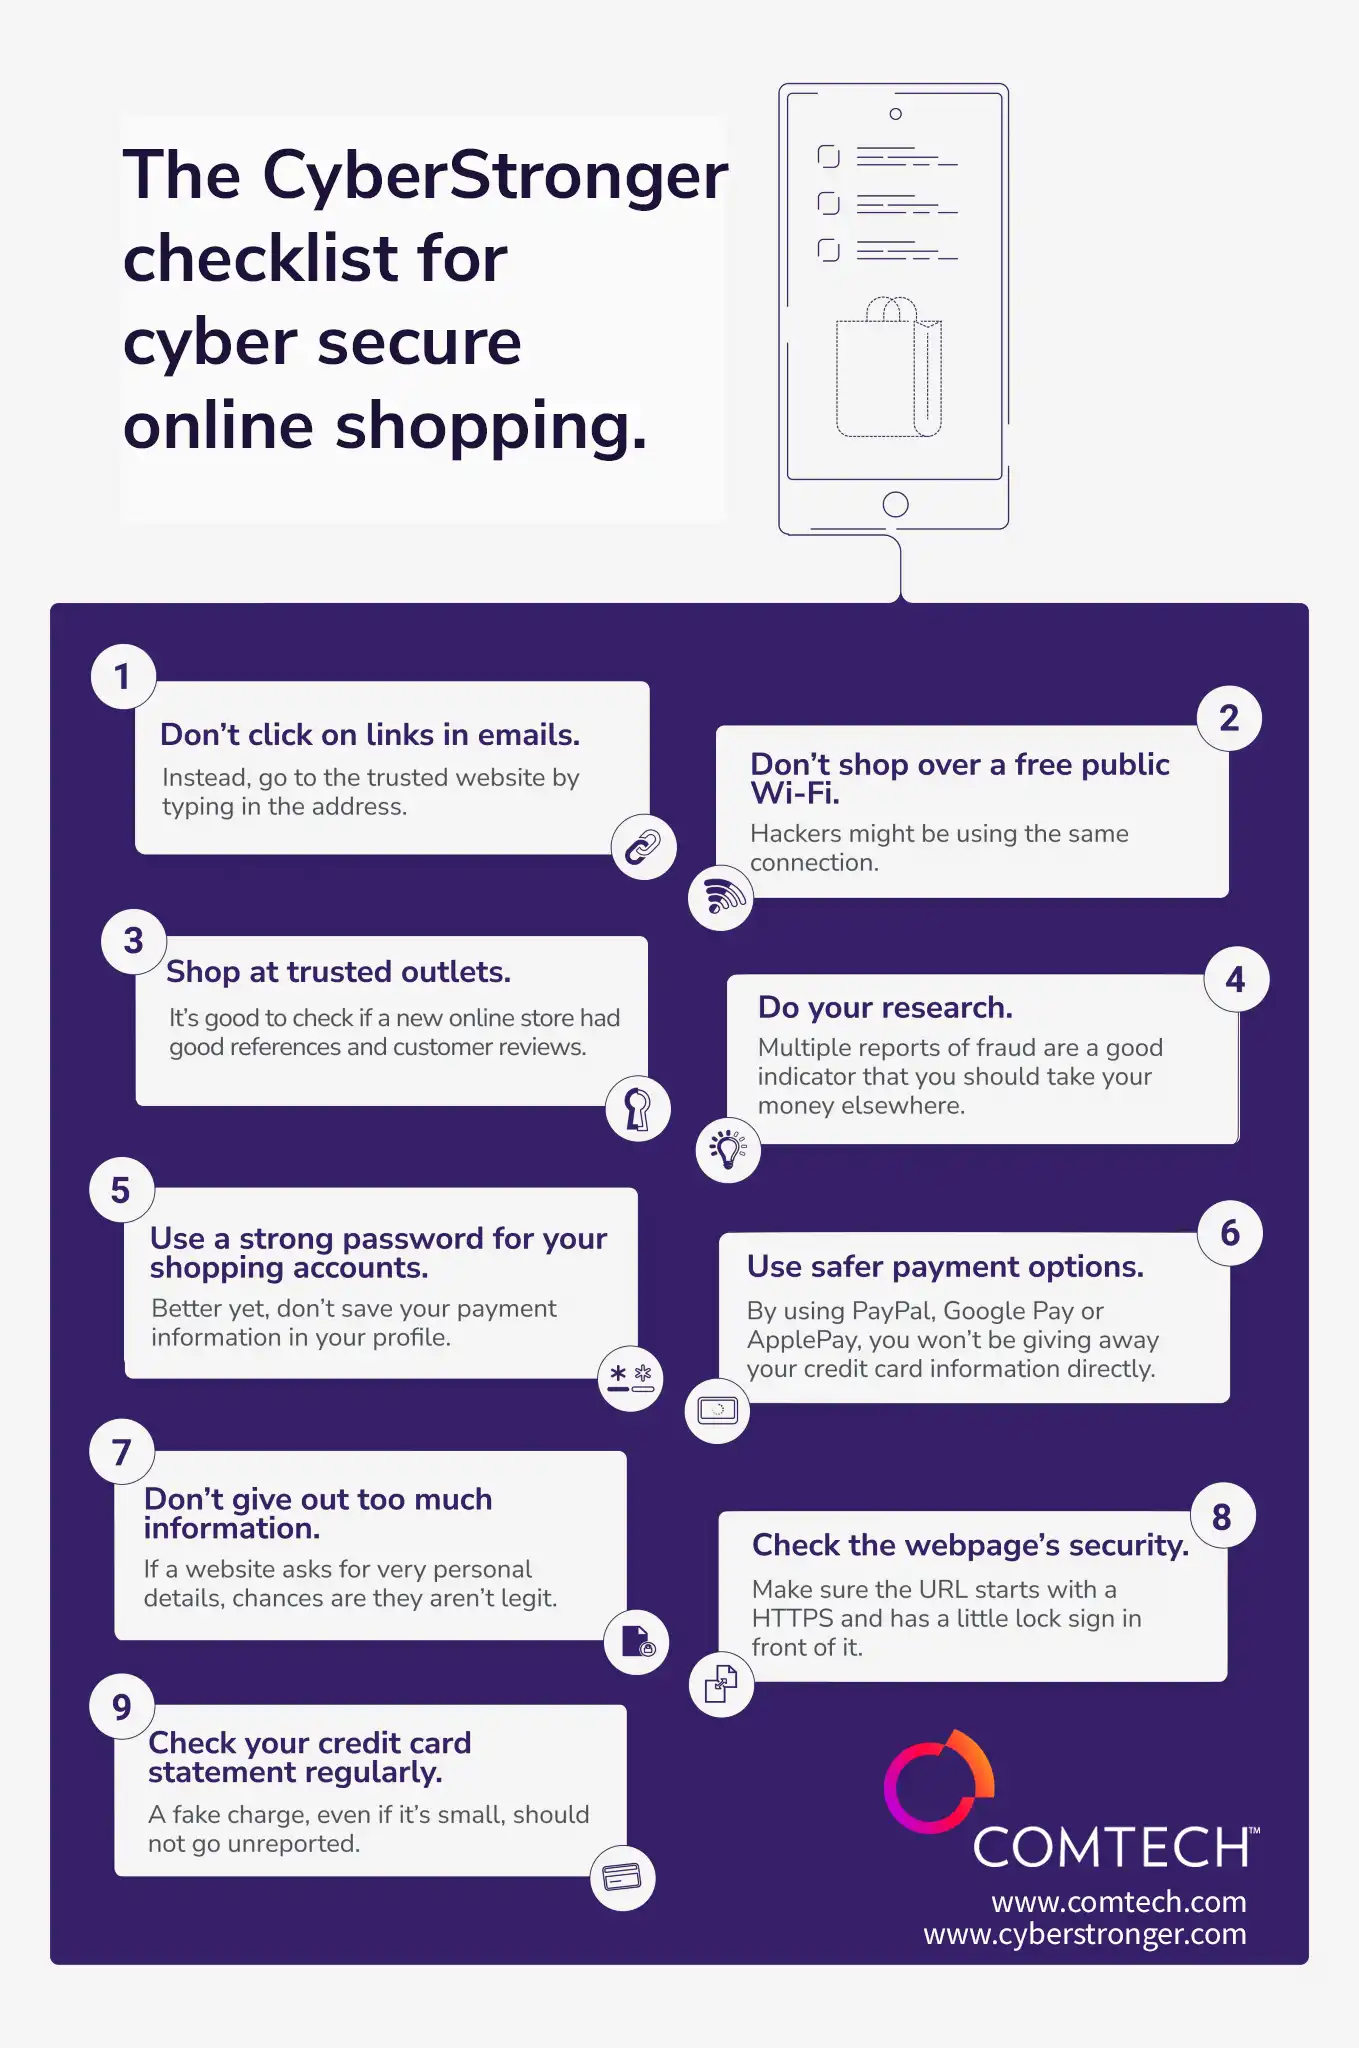 The Comtech checklist for cybersecure online shopping